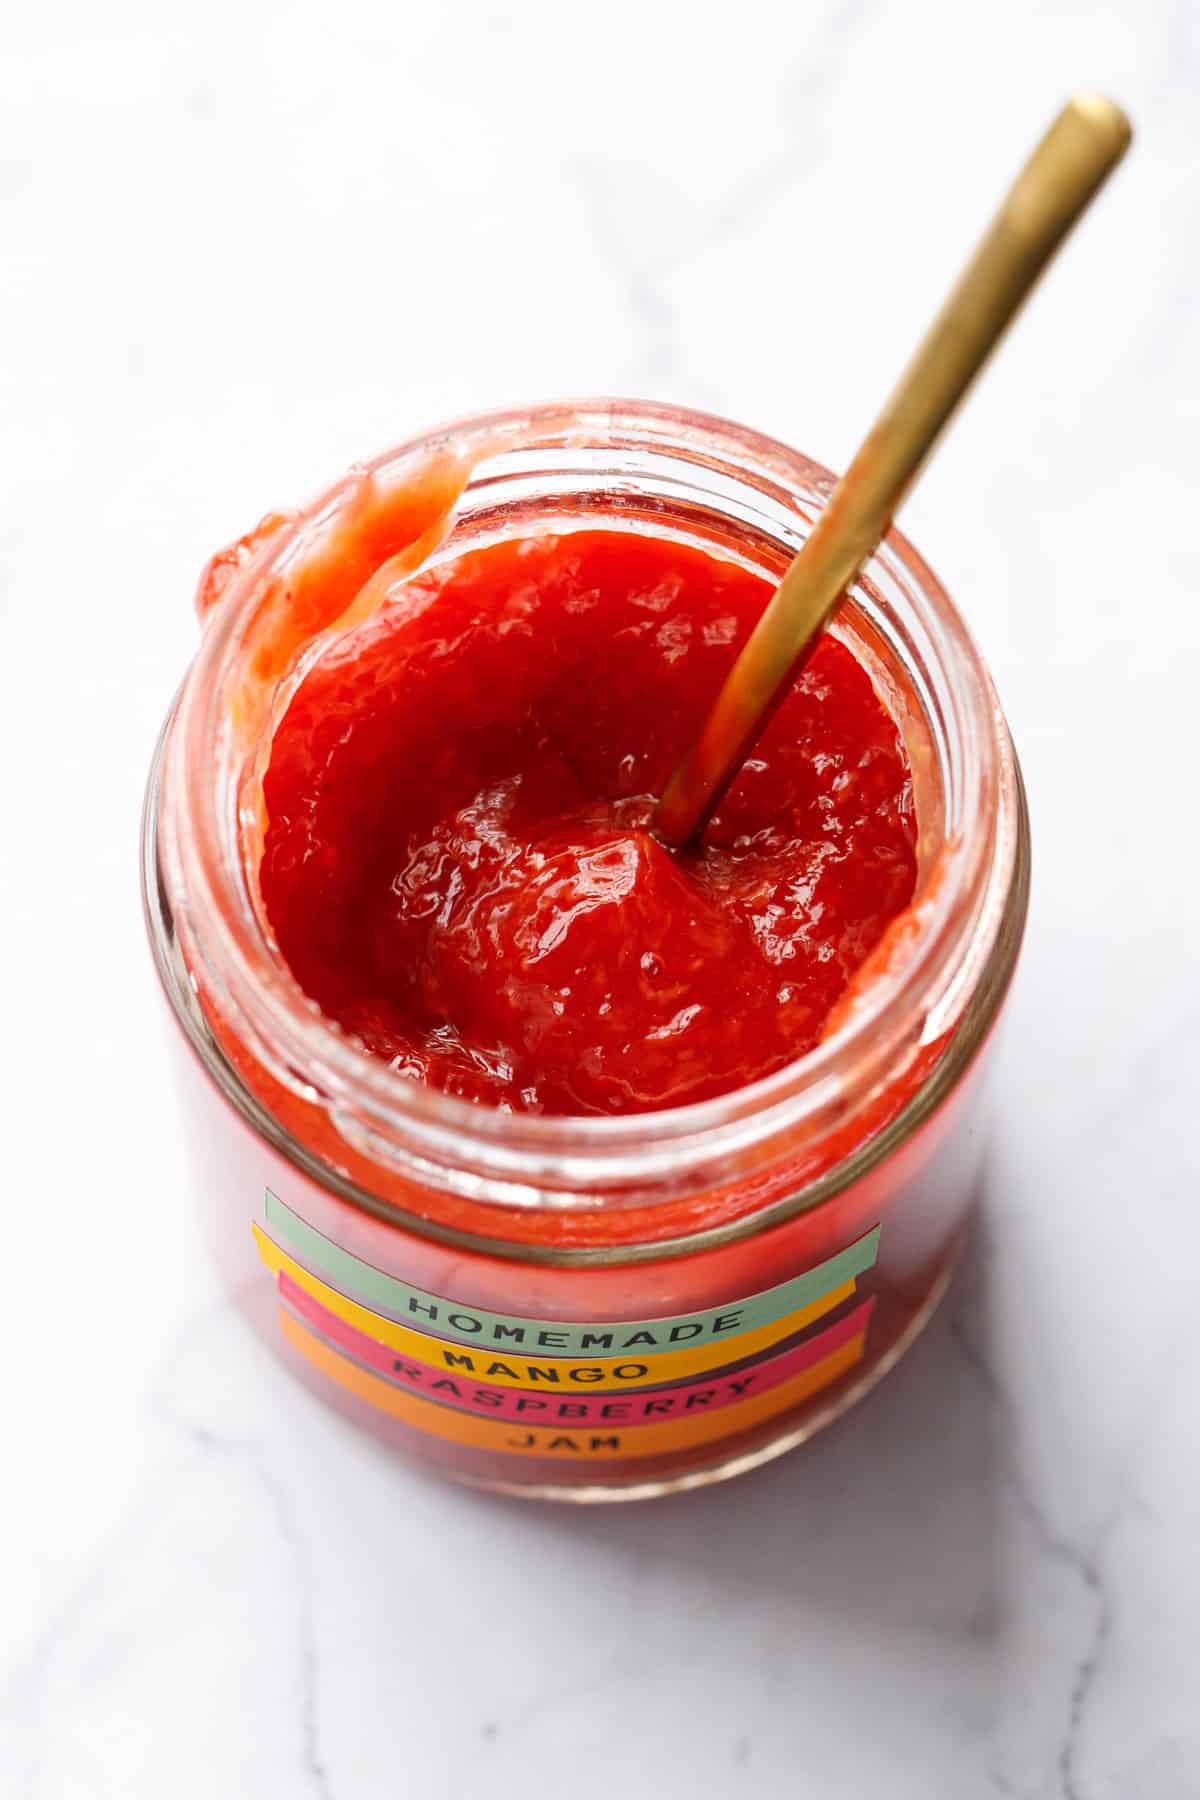 Looking down into an open jar of Mango Raspberry Jam, showing the smooth texture and bright color.